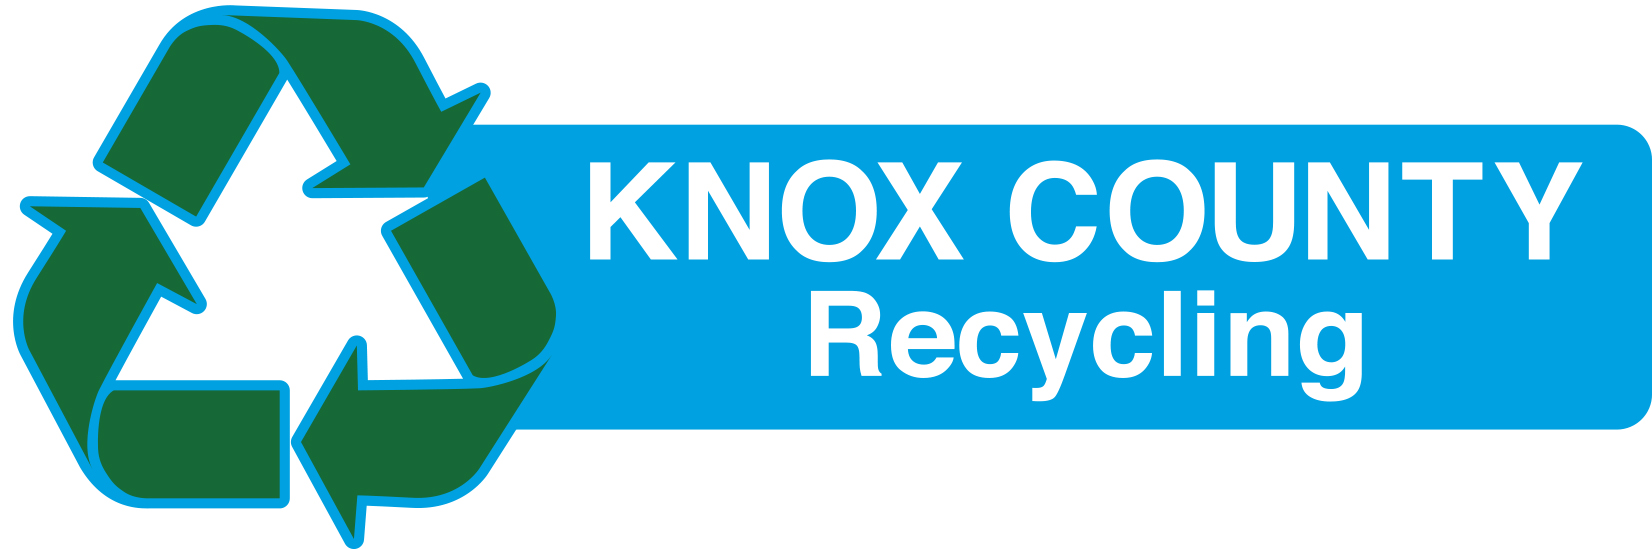 RECYCLING GRANT APPLICATION GRANT MONEY WILL BE AWARDED AT